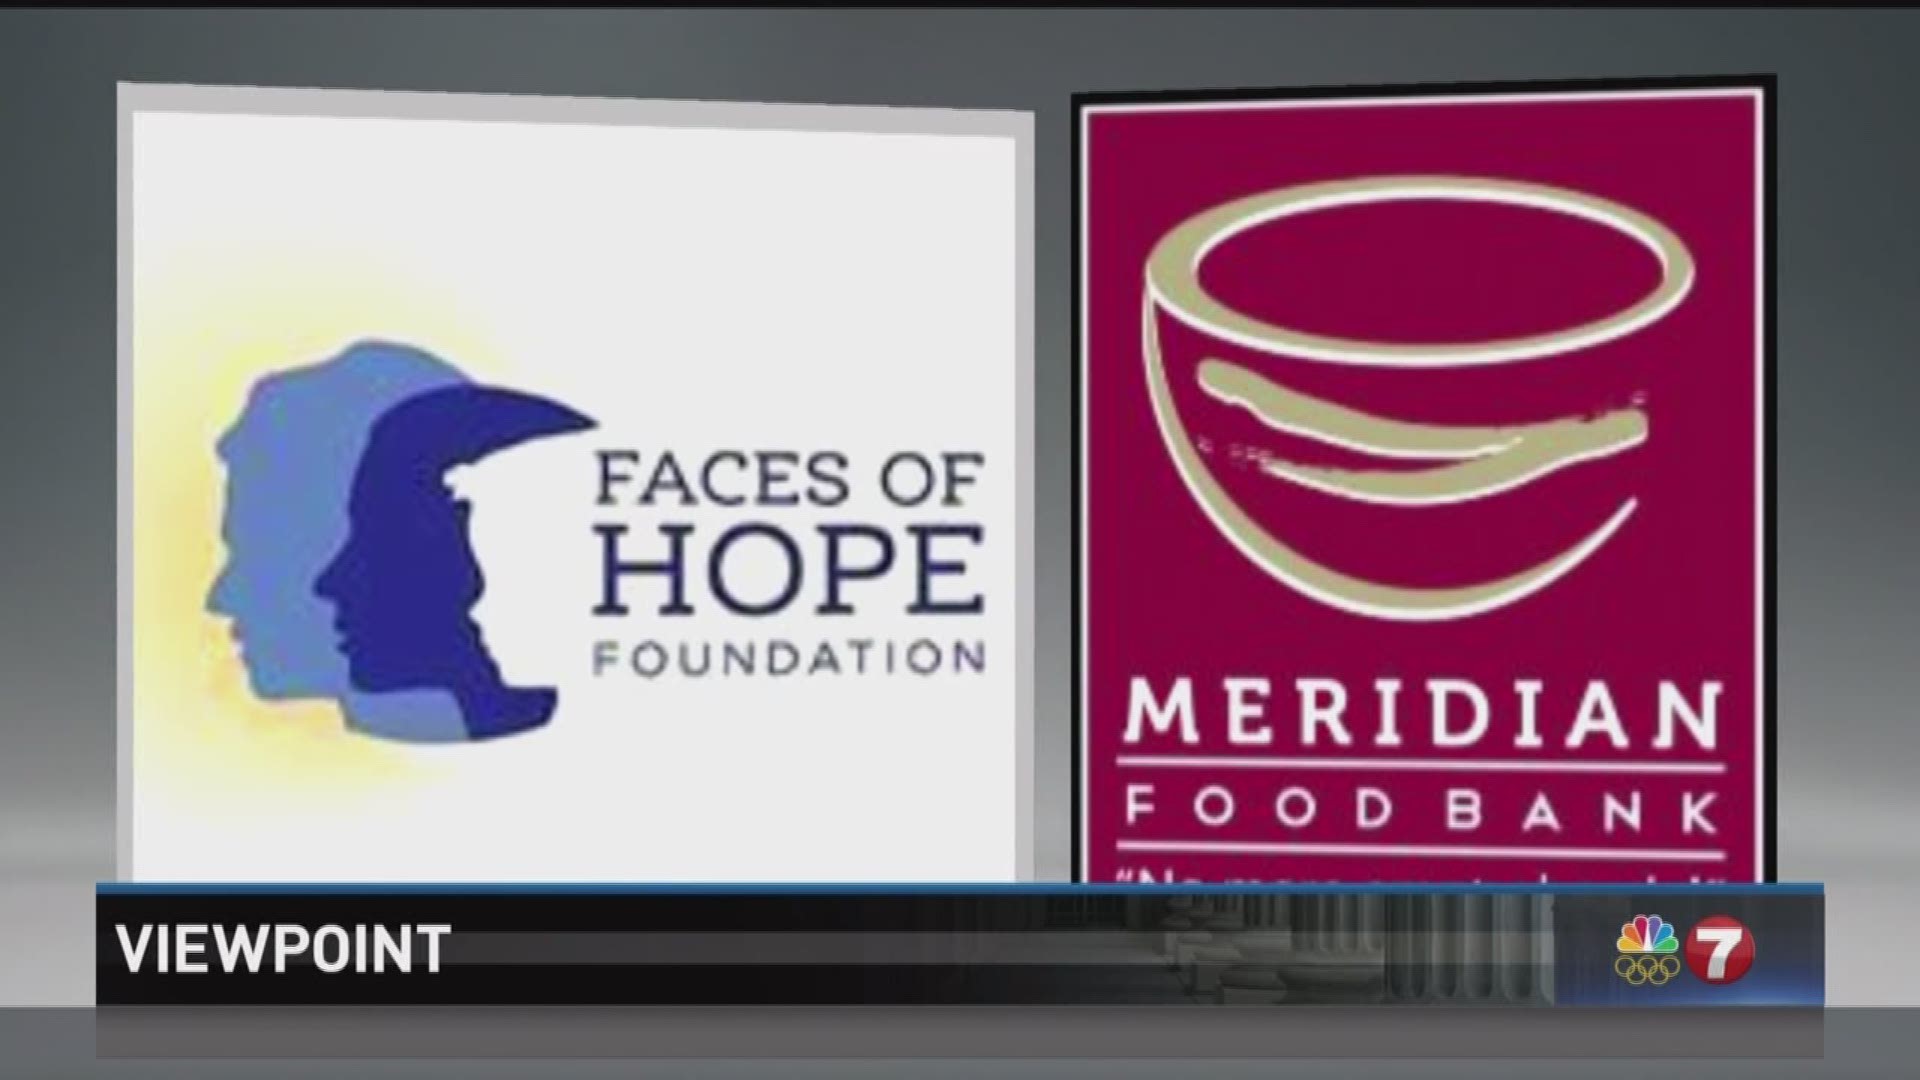 Viewpoint - Faces of Hope Victim Center, Meridian Food Bank